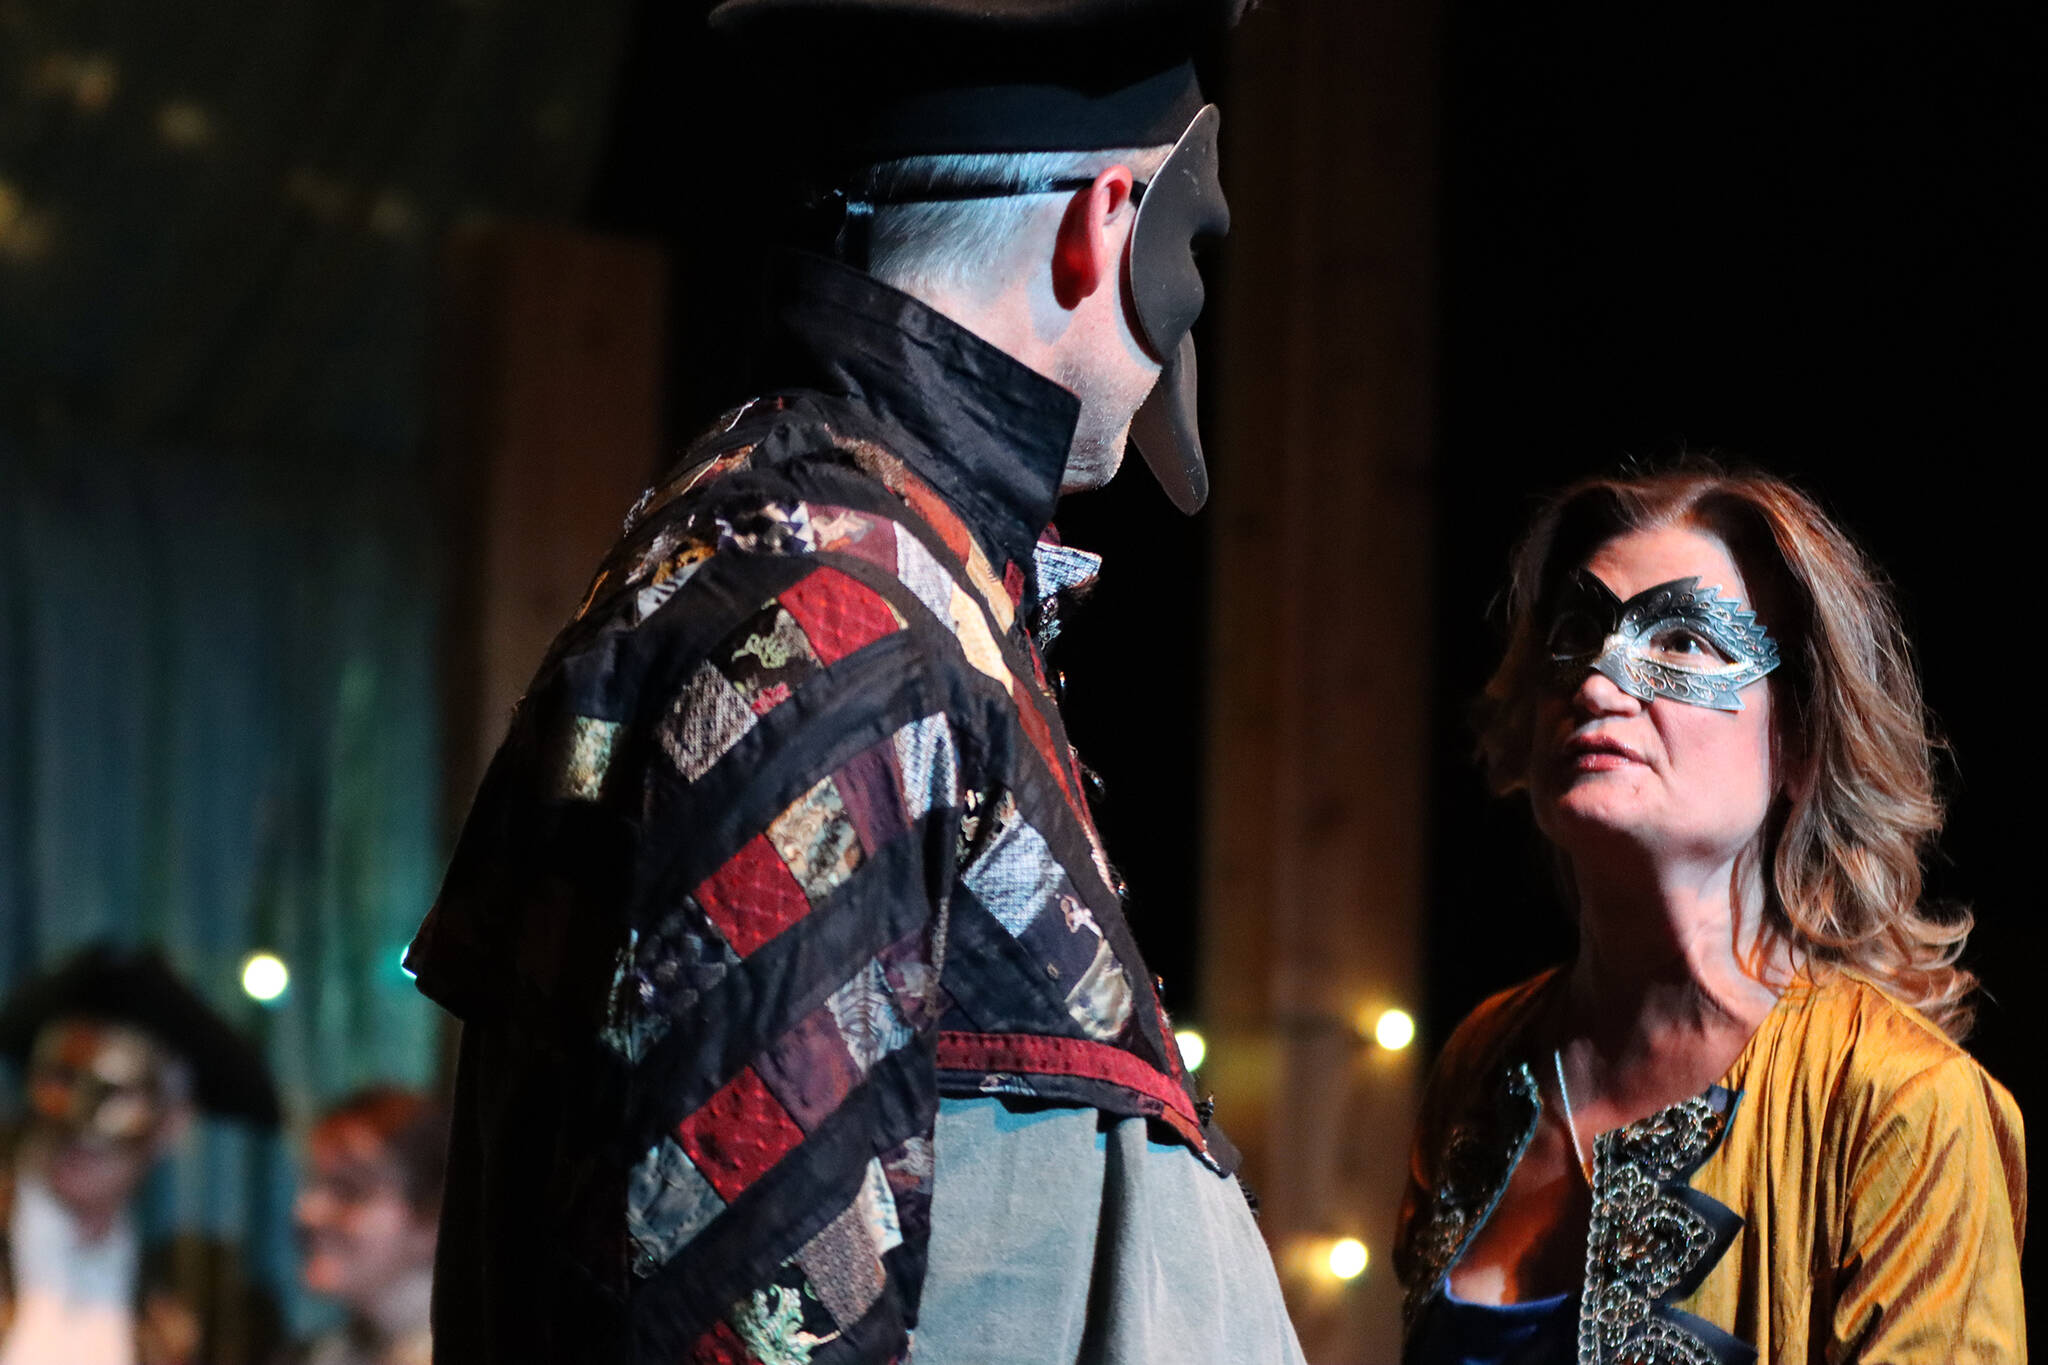 Ben Hohenstatt / Capital City Weekly 
A masked Benedick (Aaron Elmore) and Beatrice (Katie Jensen) exchange repartee during dress rehearsal for Theatre in the Rough’s production of “Much Ado About Nothing.”